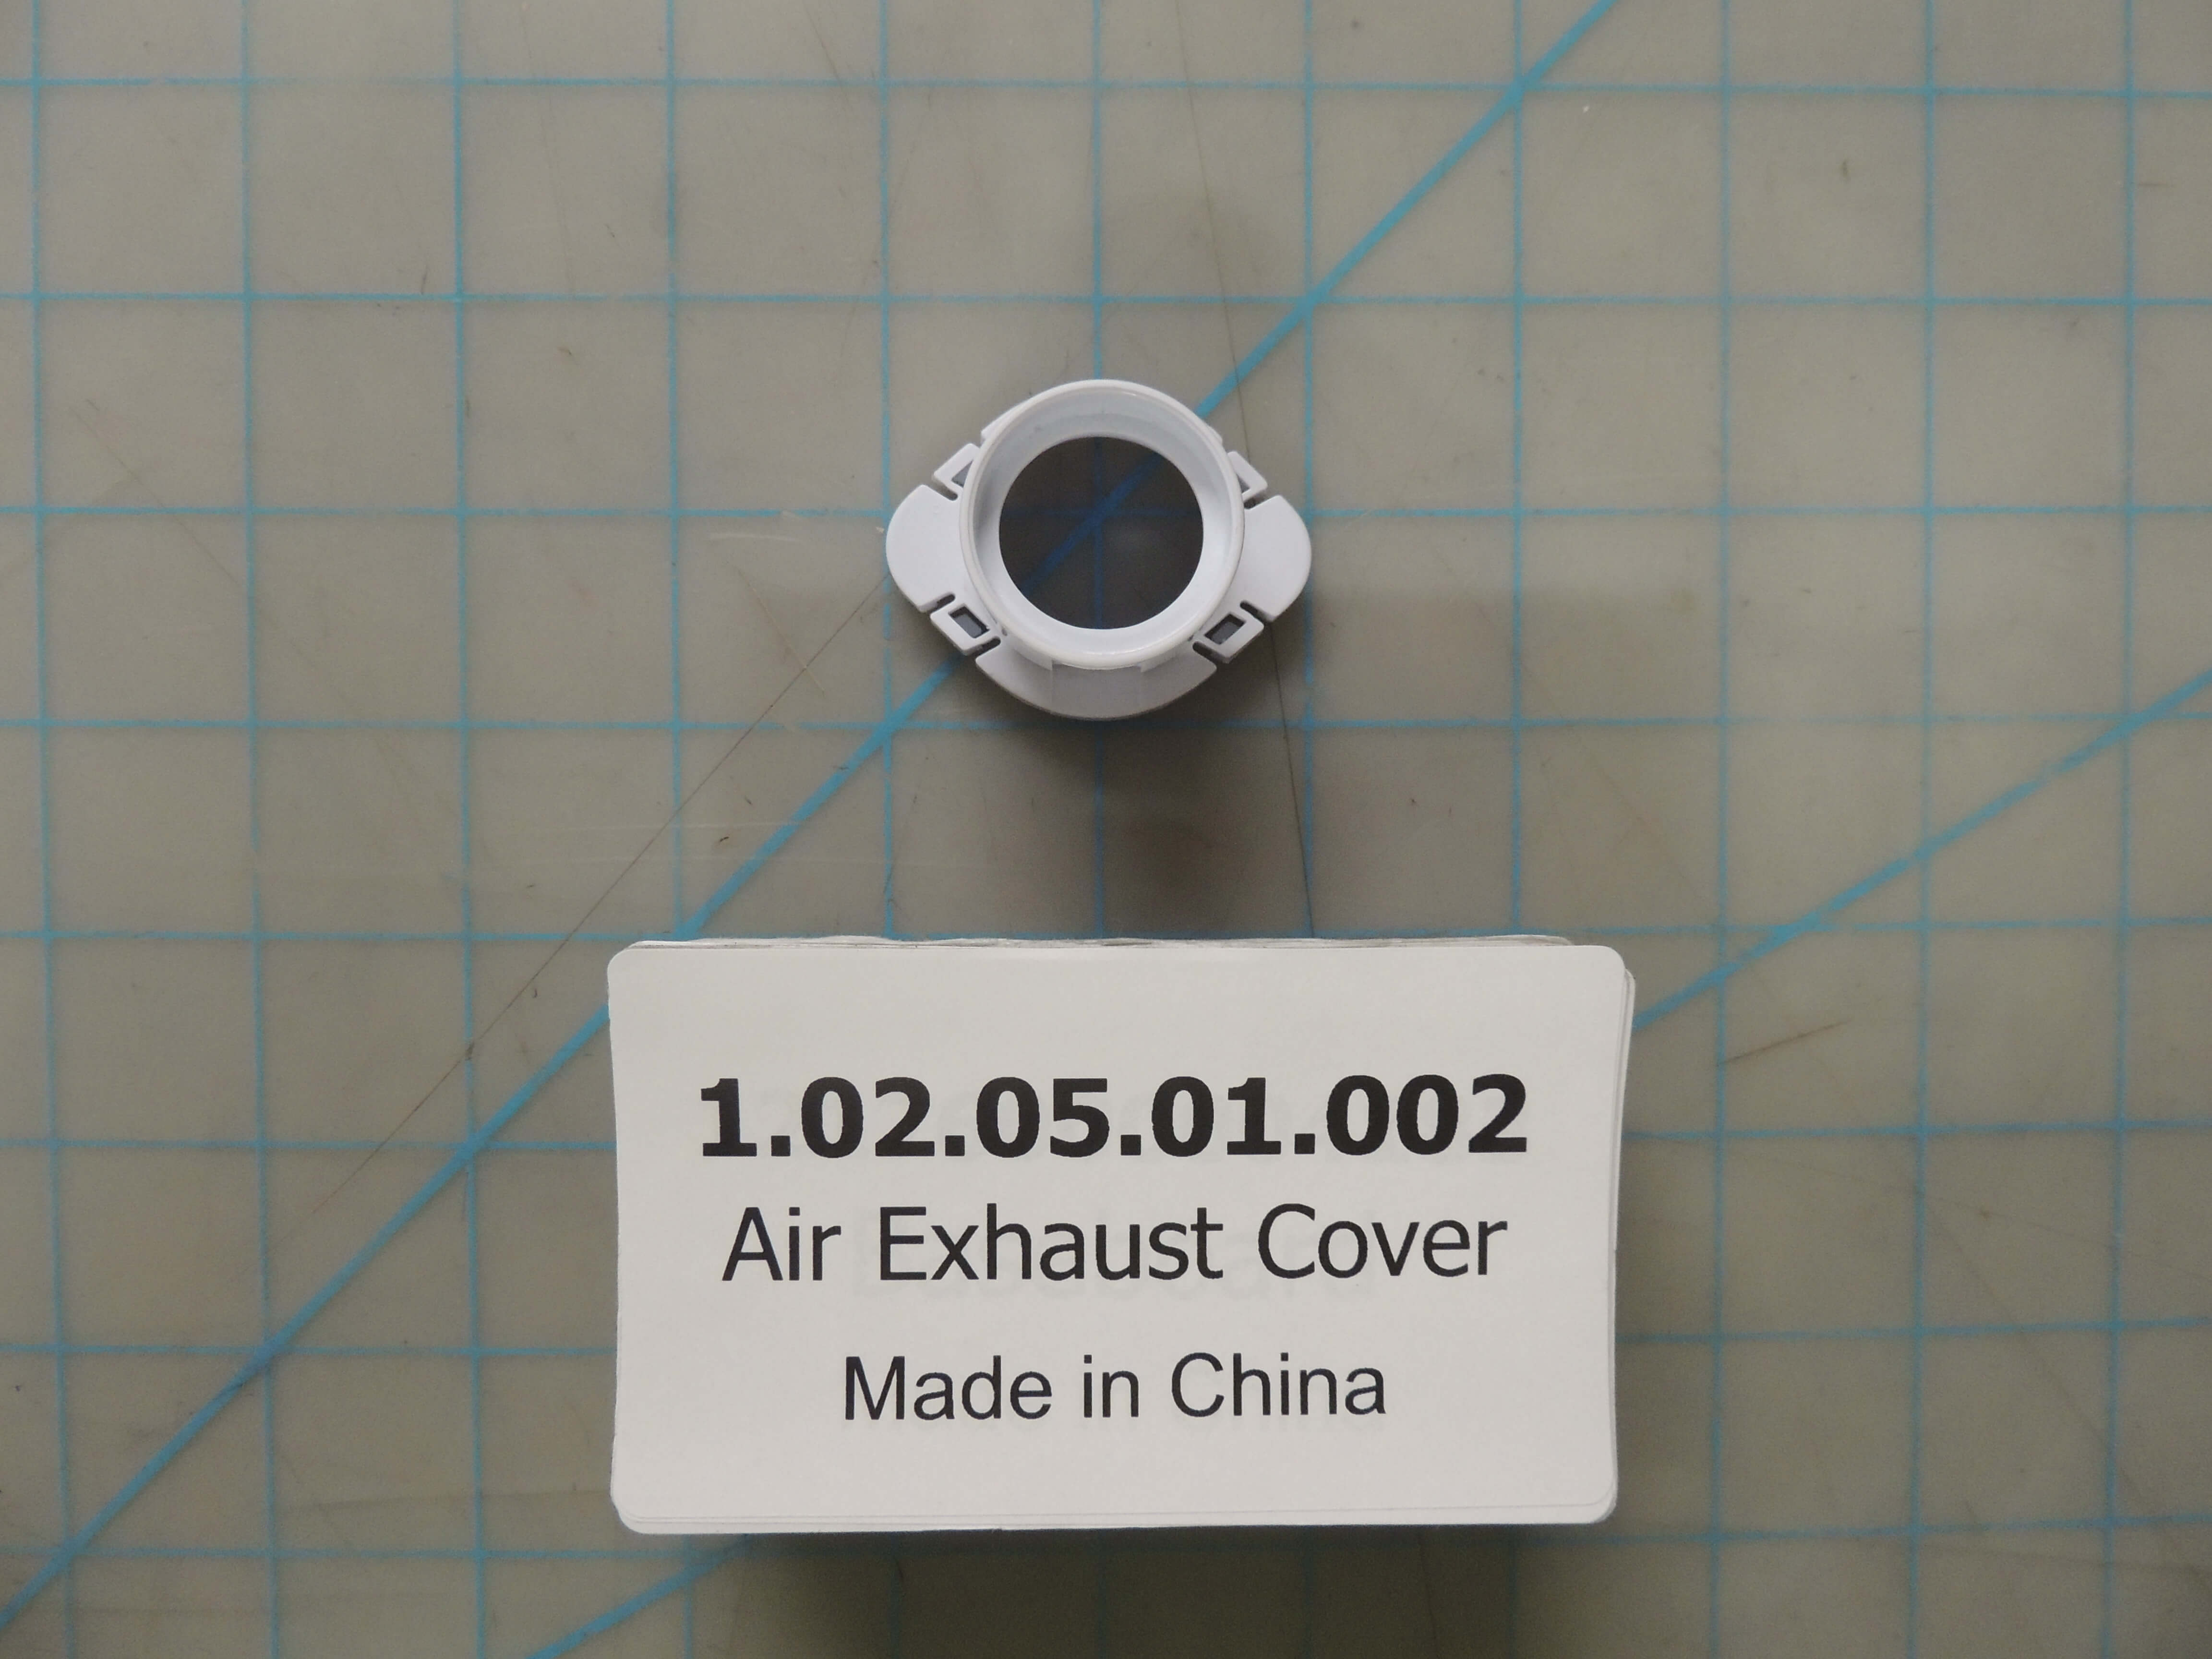 Air Exhaust Cover